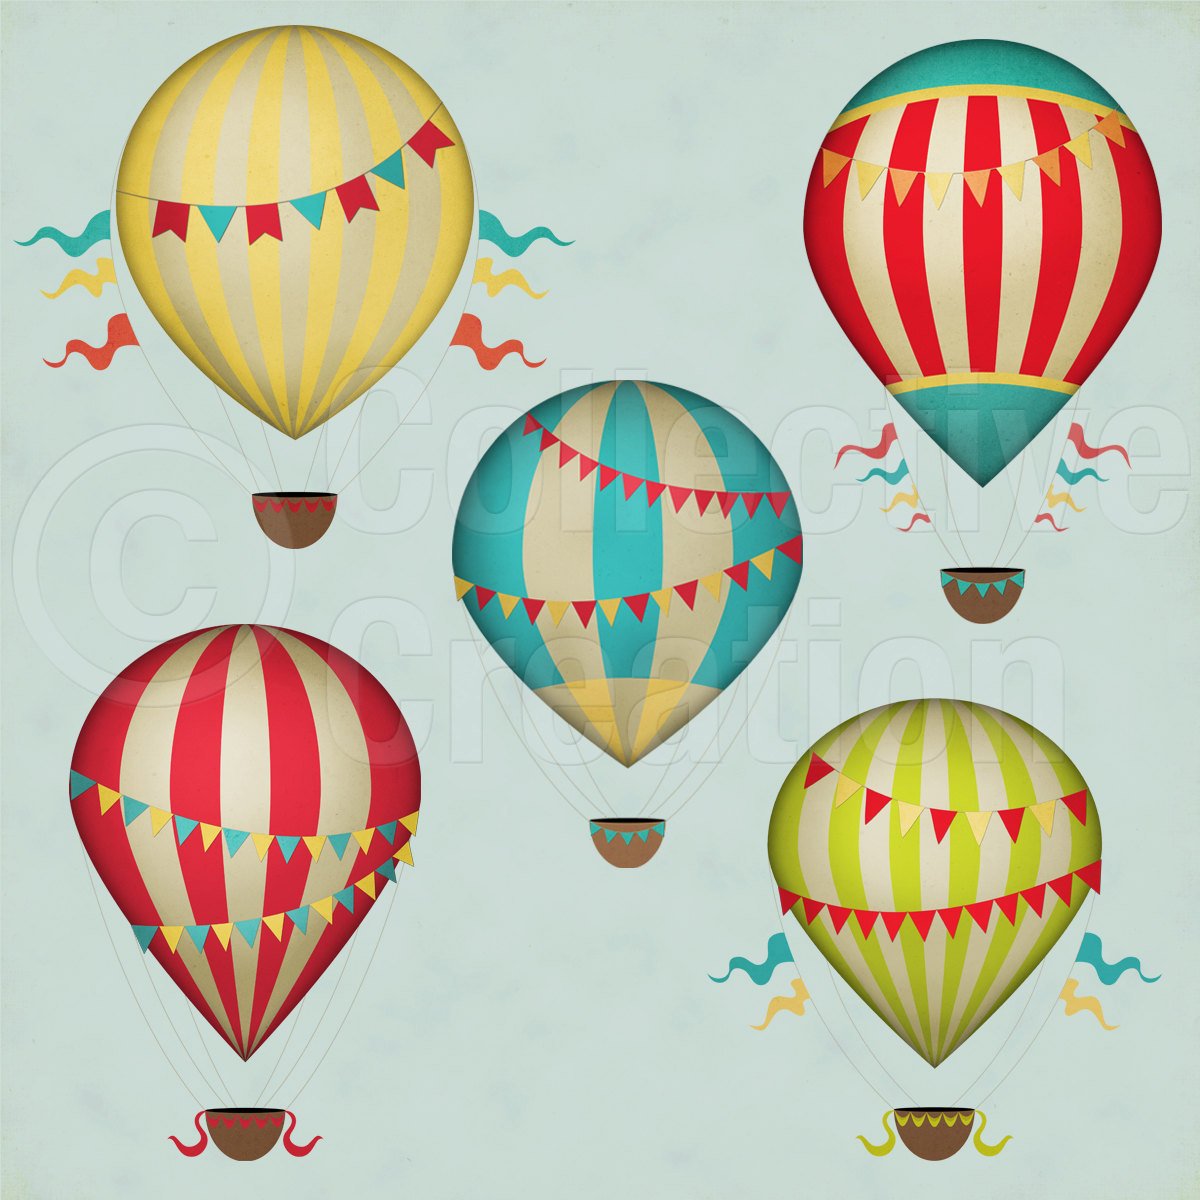 Vintage Hot Air Balloons Digital Clip Art By Collectivecreation